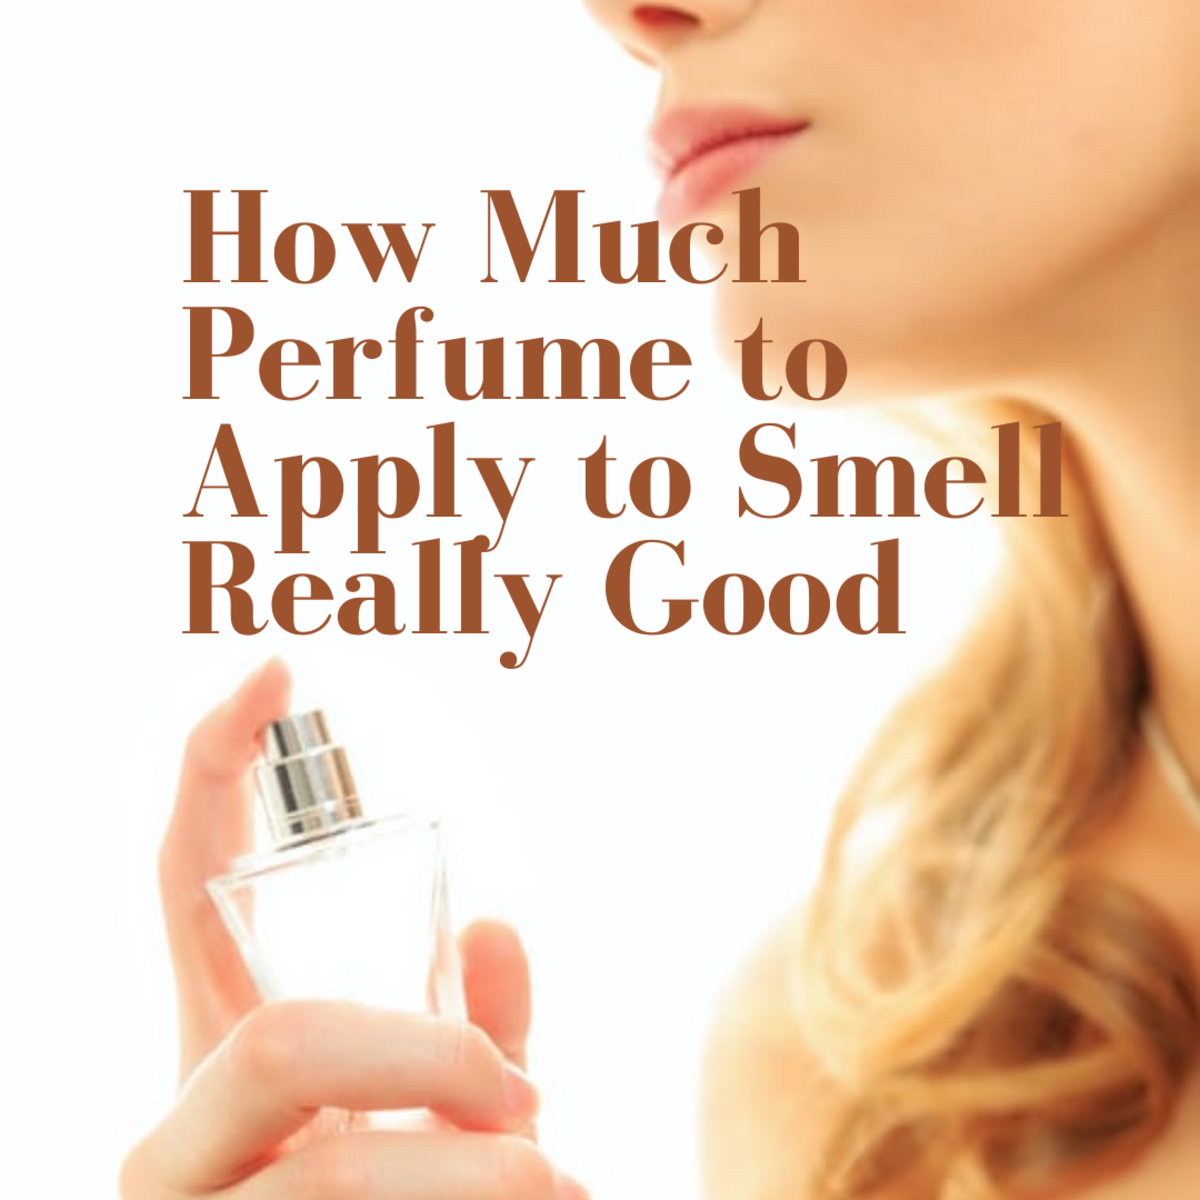 How Much Perfume Should You Apply to Smell Just Right?